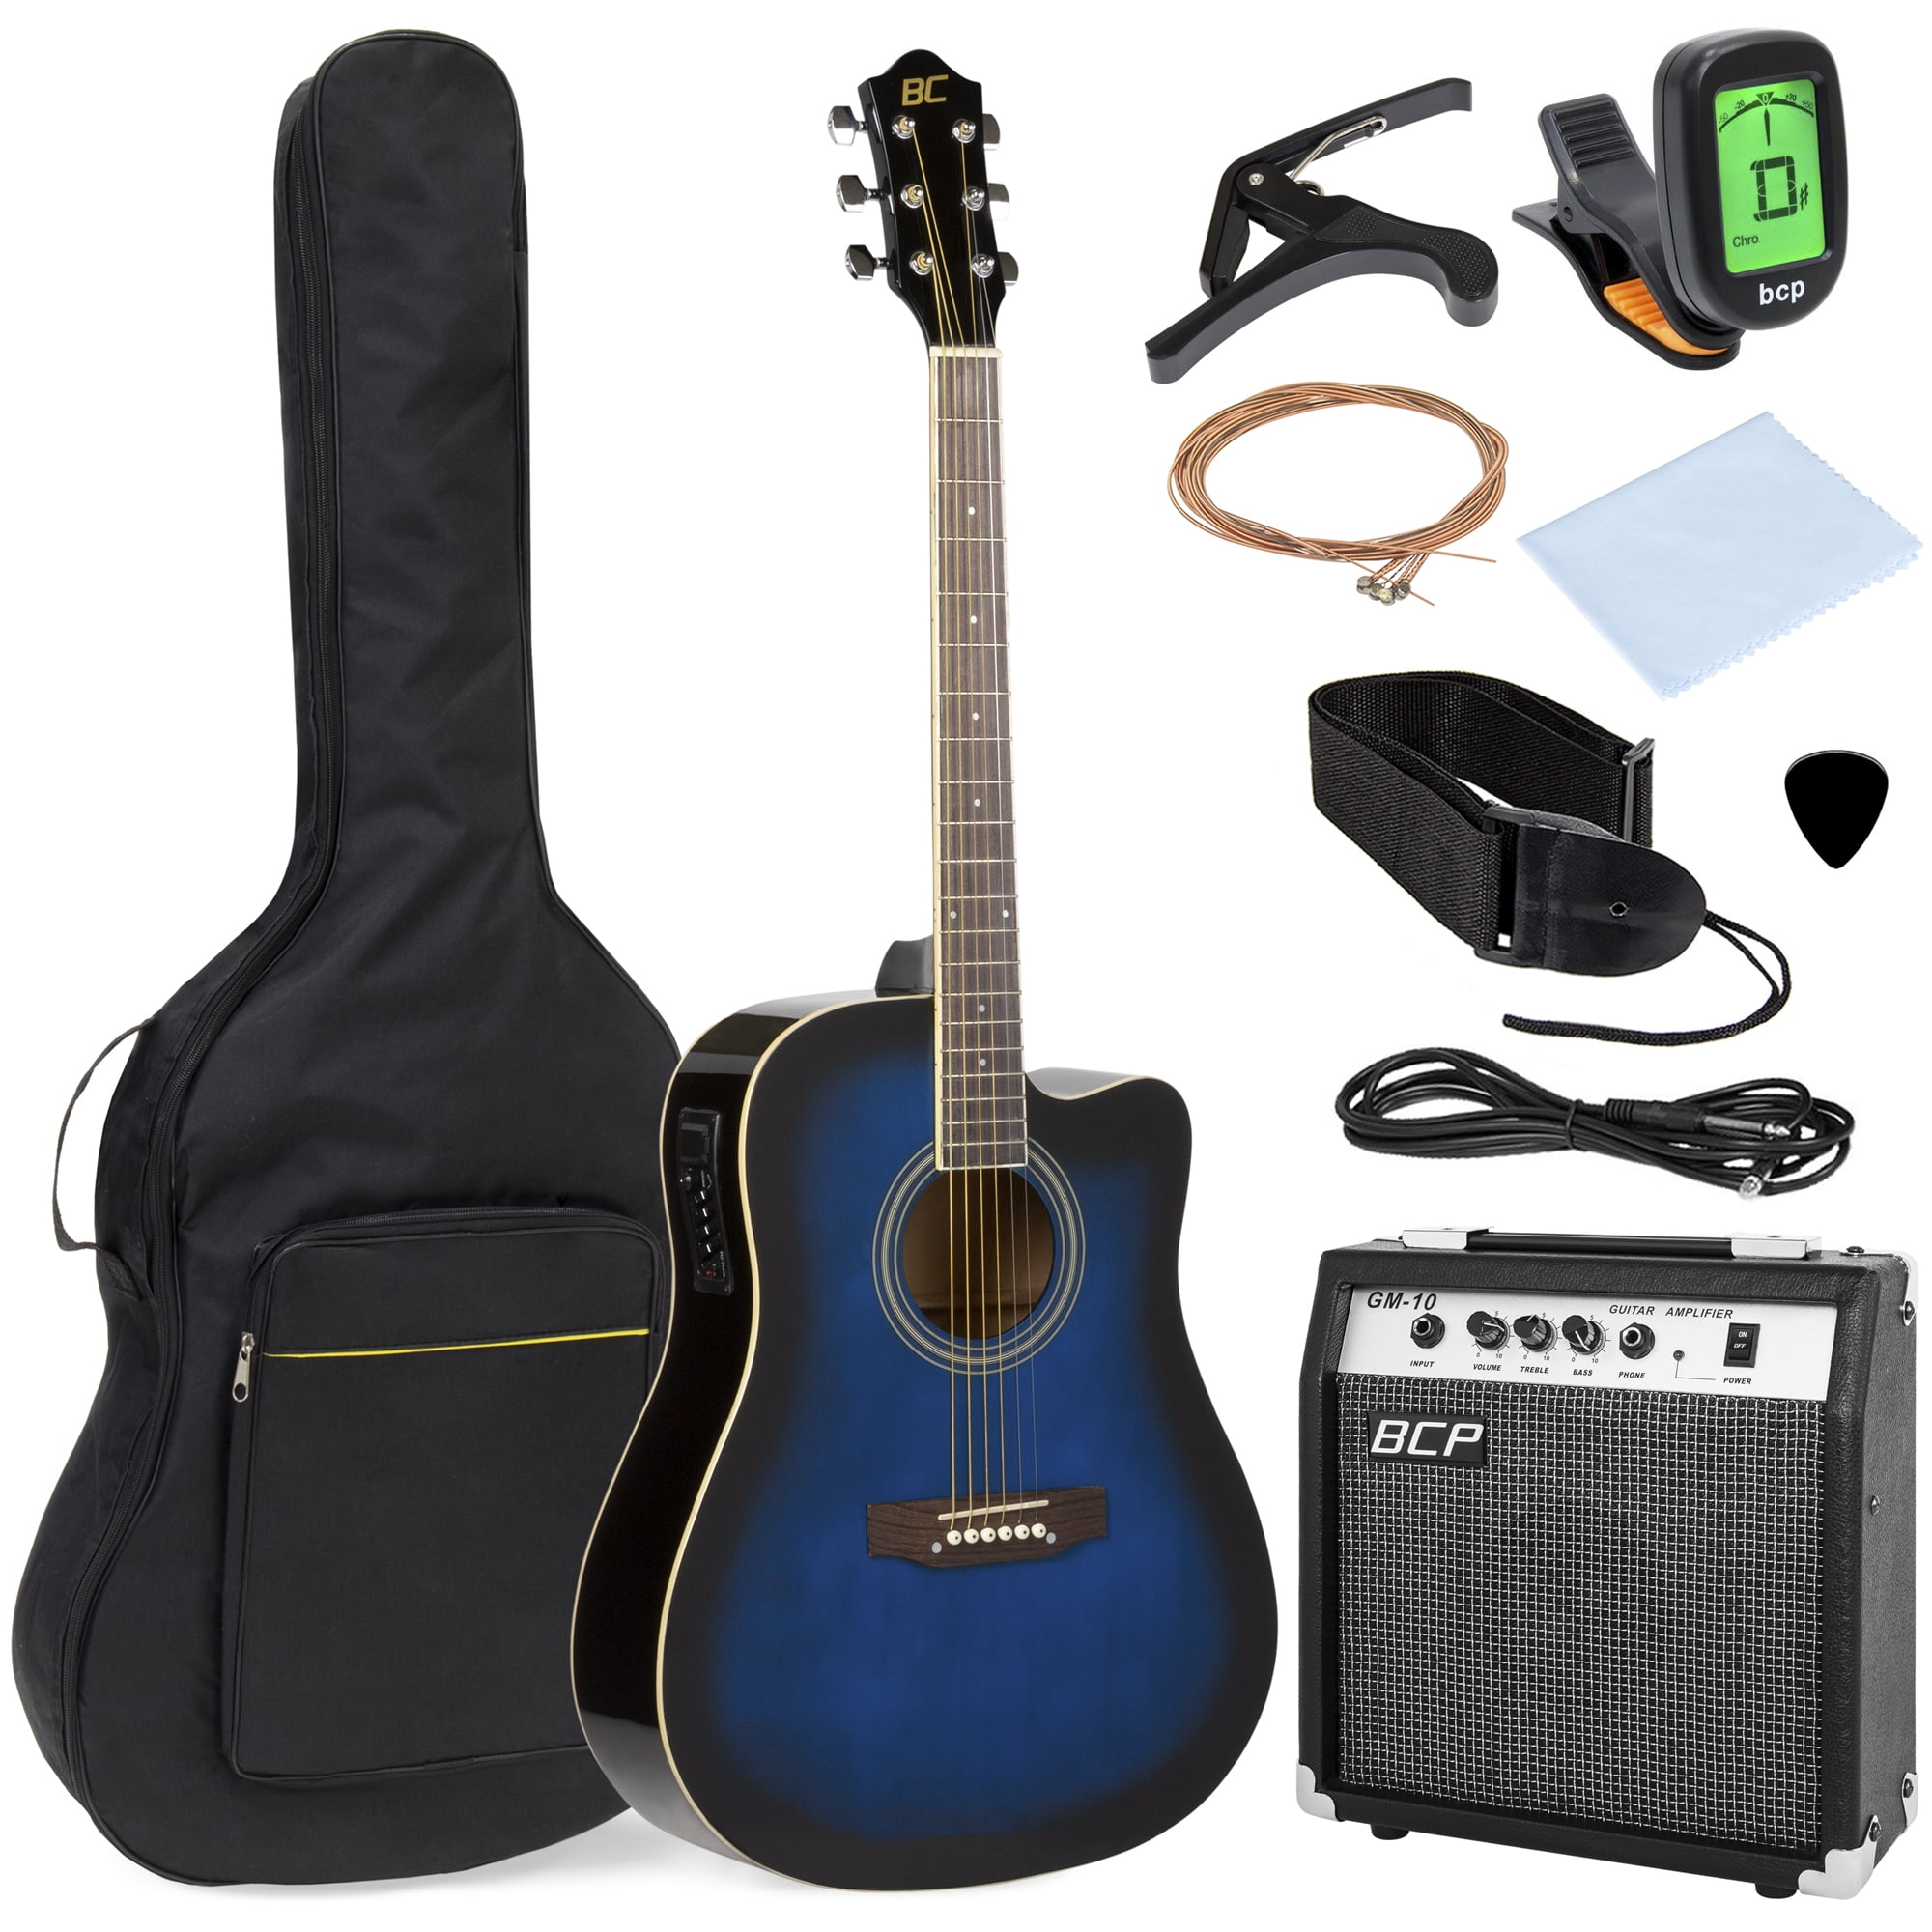 Best Choice Products 41in Full Size Acoustic Electric Cutaway Guitar Set w/ 10-Watt Amp, Capo, E-Tuner, Case - Blue